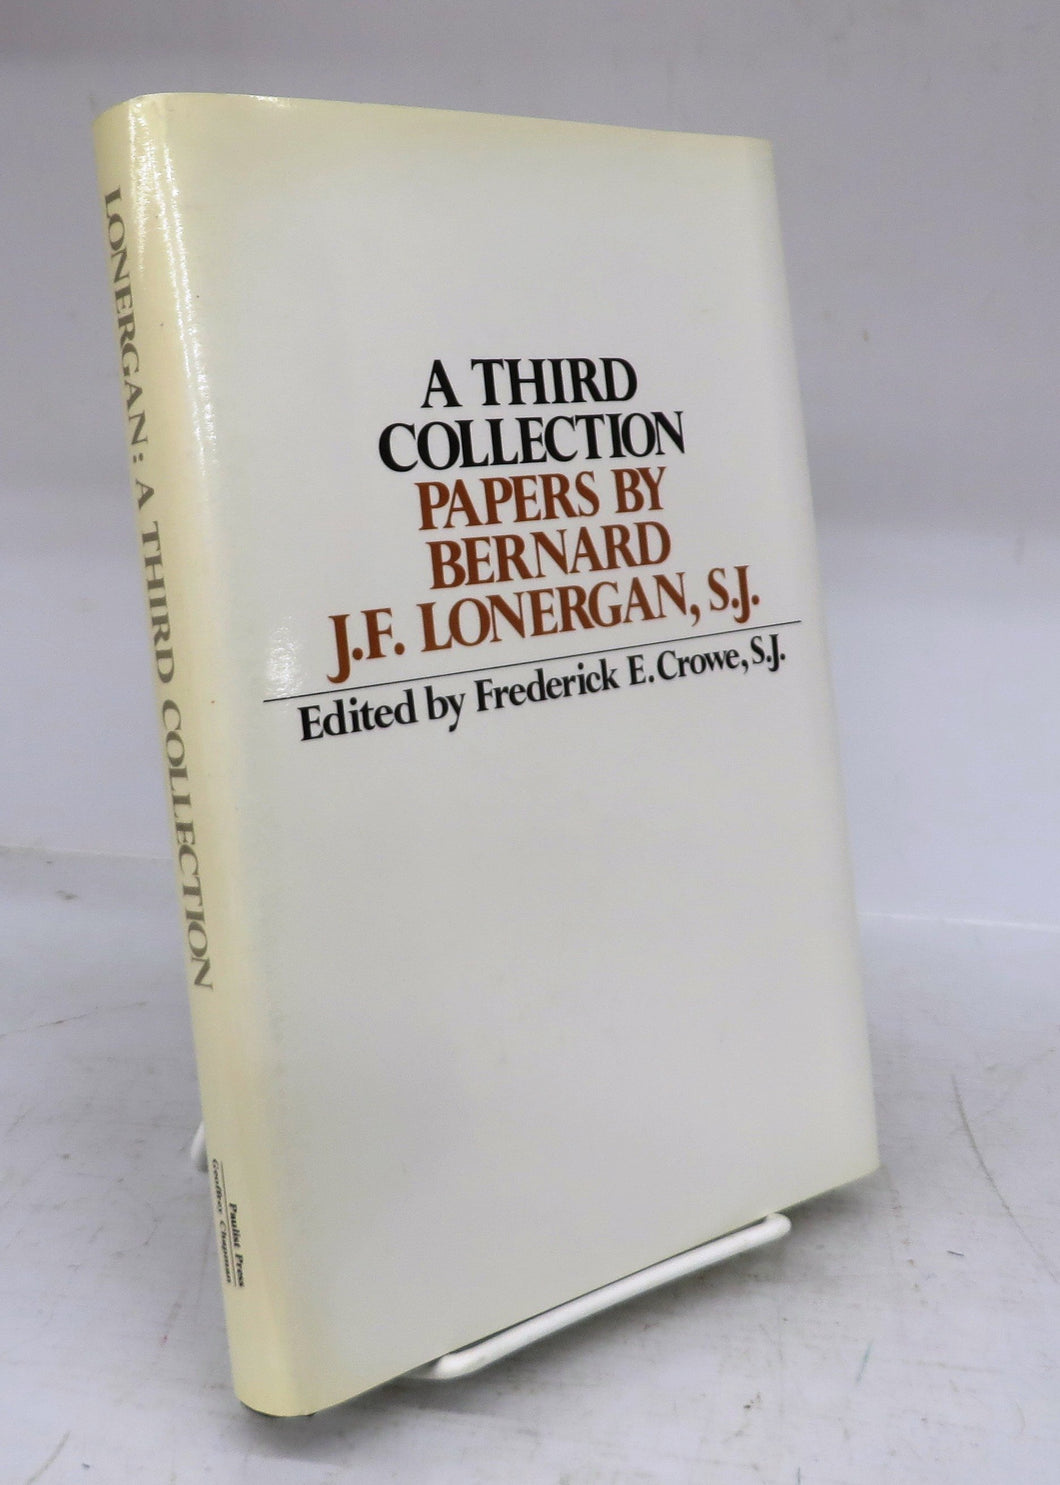 A Third Collection: Papers by Bernard J. F. Lonergan, S. J.